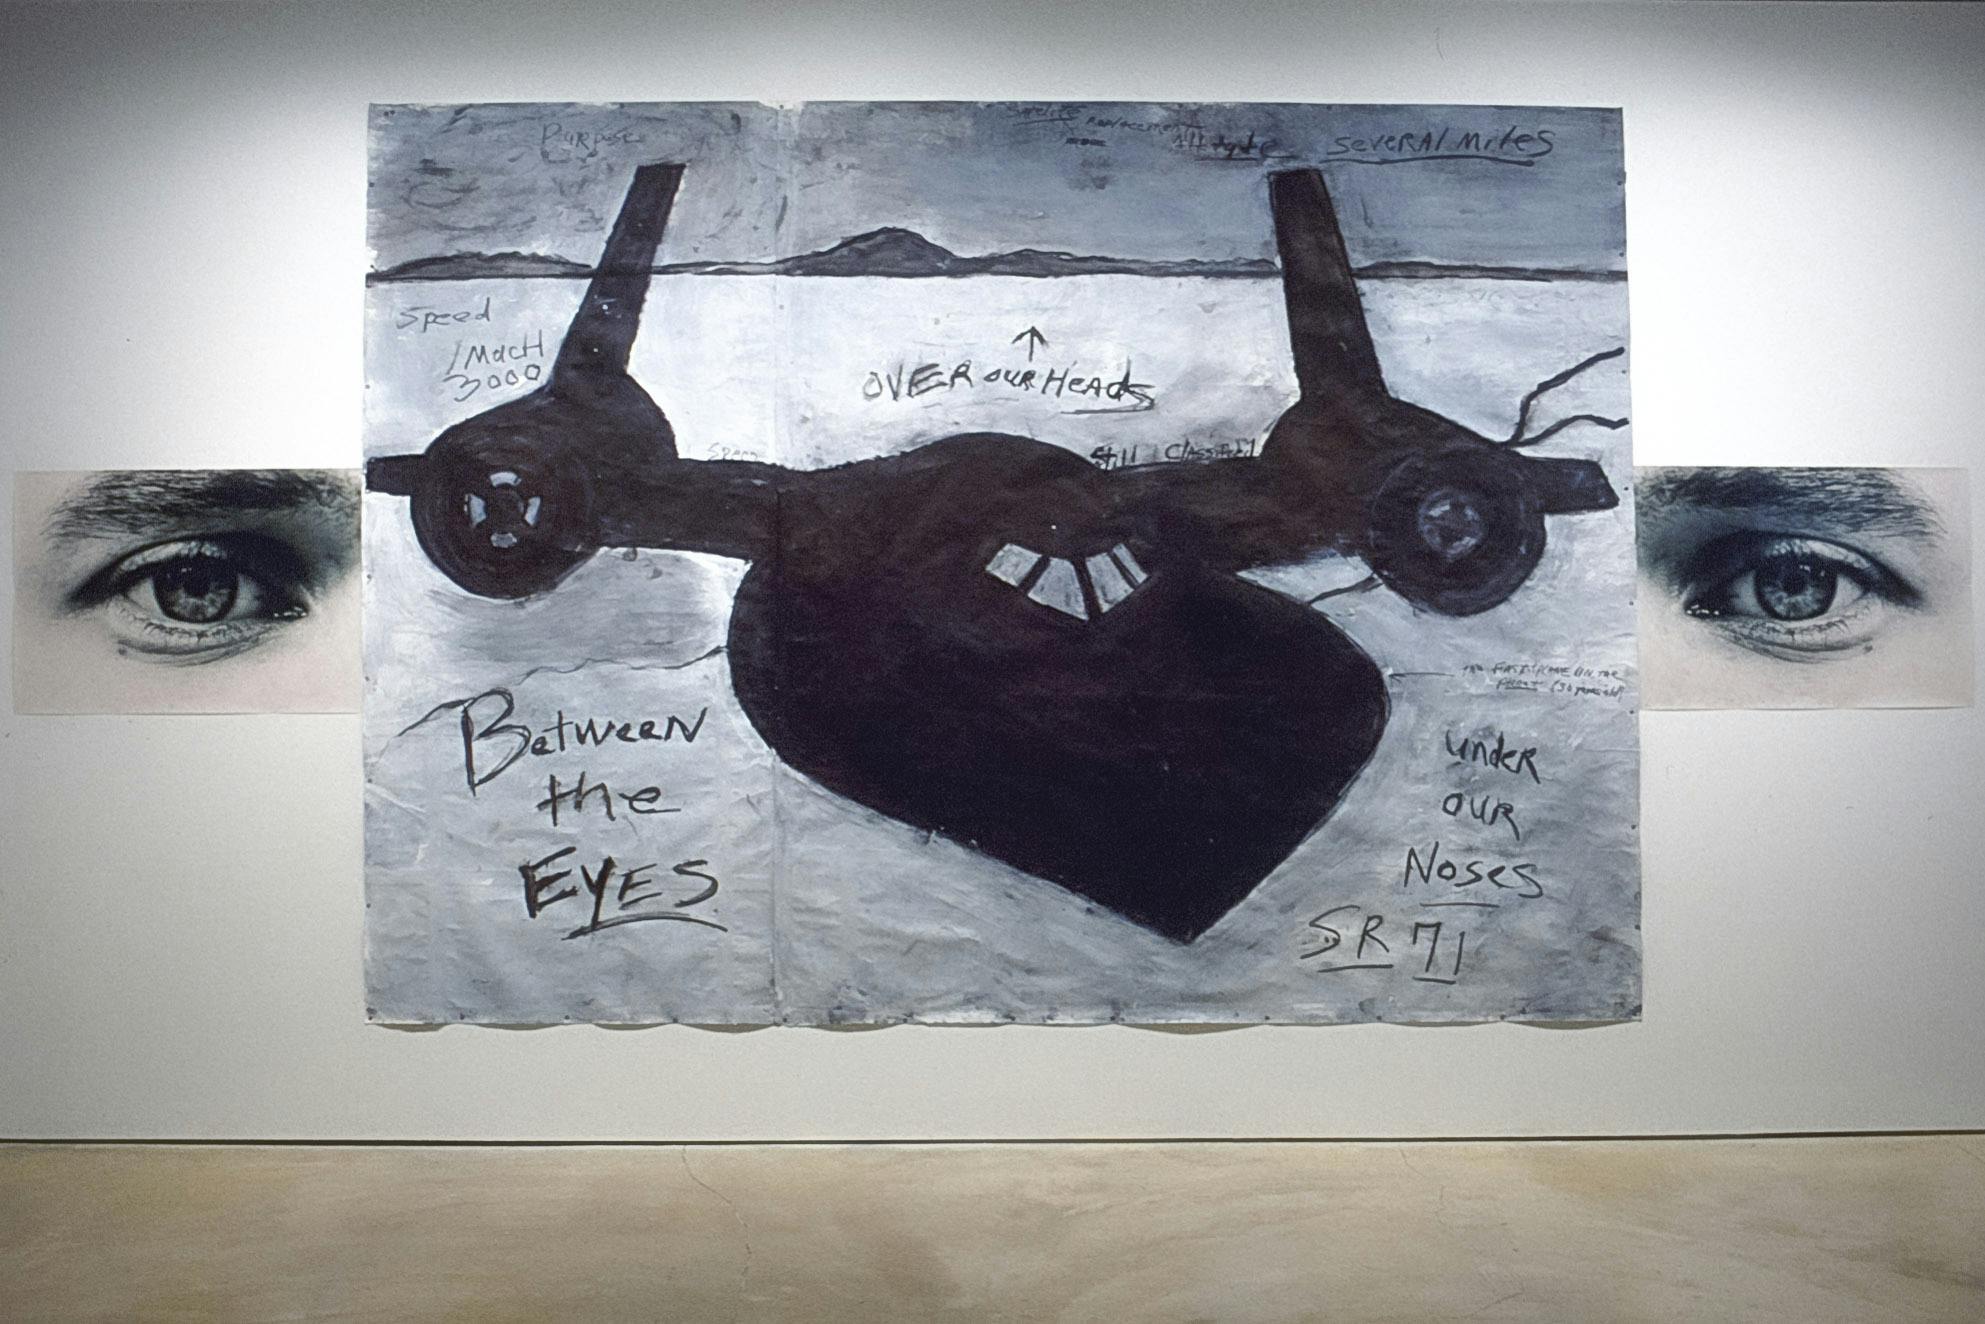 A large black and white drawing is installed on the gallery wall. A black airplane is drawn above the word “SR71." This drawing is placed in between a pair of photographs of human eyes.